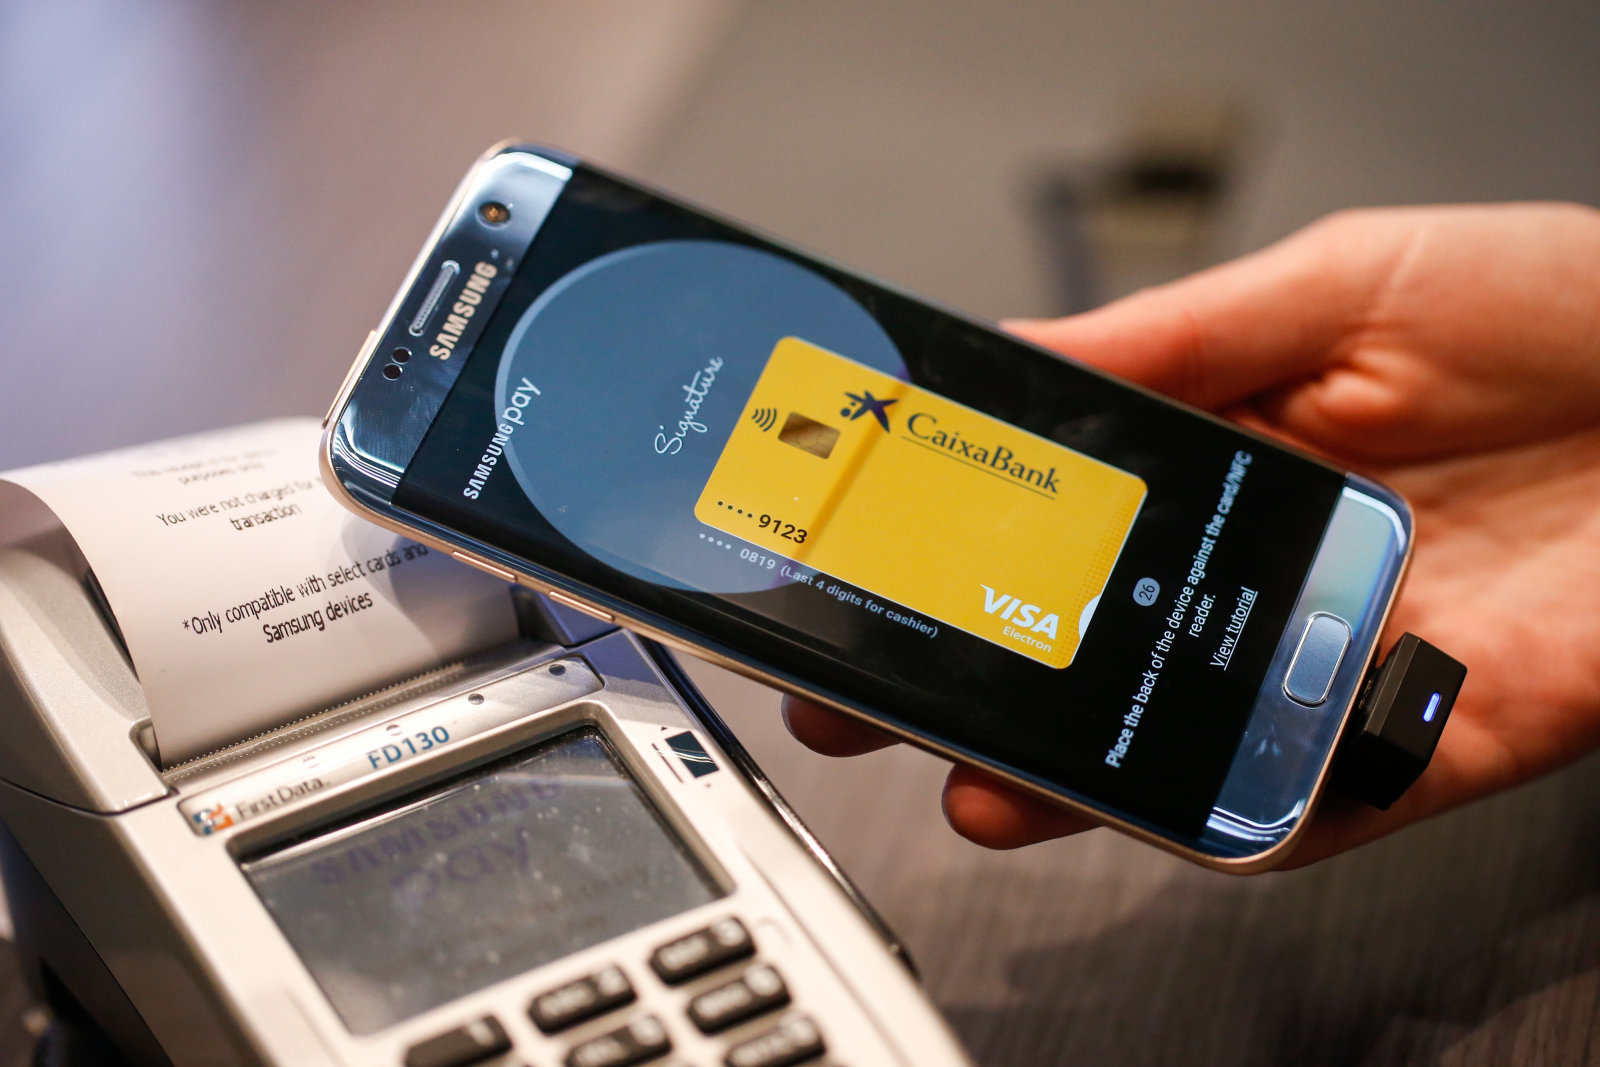 A worker demonstrates wireless payment using the Samsung Pay app on a Galaxy smartphone, manufactured by Samsung Electronics Co. Ltd., on the opening day of the Mobile World Congress (MWC) in Barcelona, Spain, on Monday, Feb. 27, 2017. A theme this year at the industry's annual get-together, which runs through March 2, is the Internet of Things. Photographer: Pau Barrena/Bloomberg via Getty Images